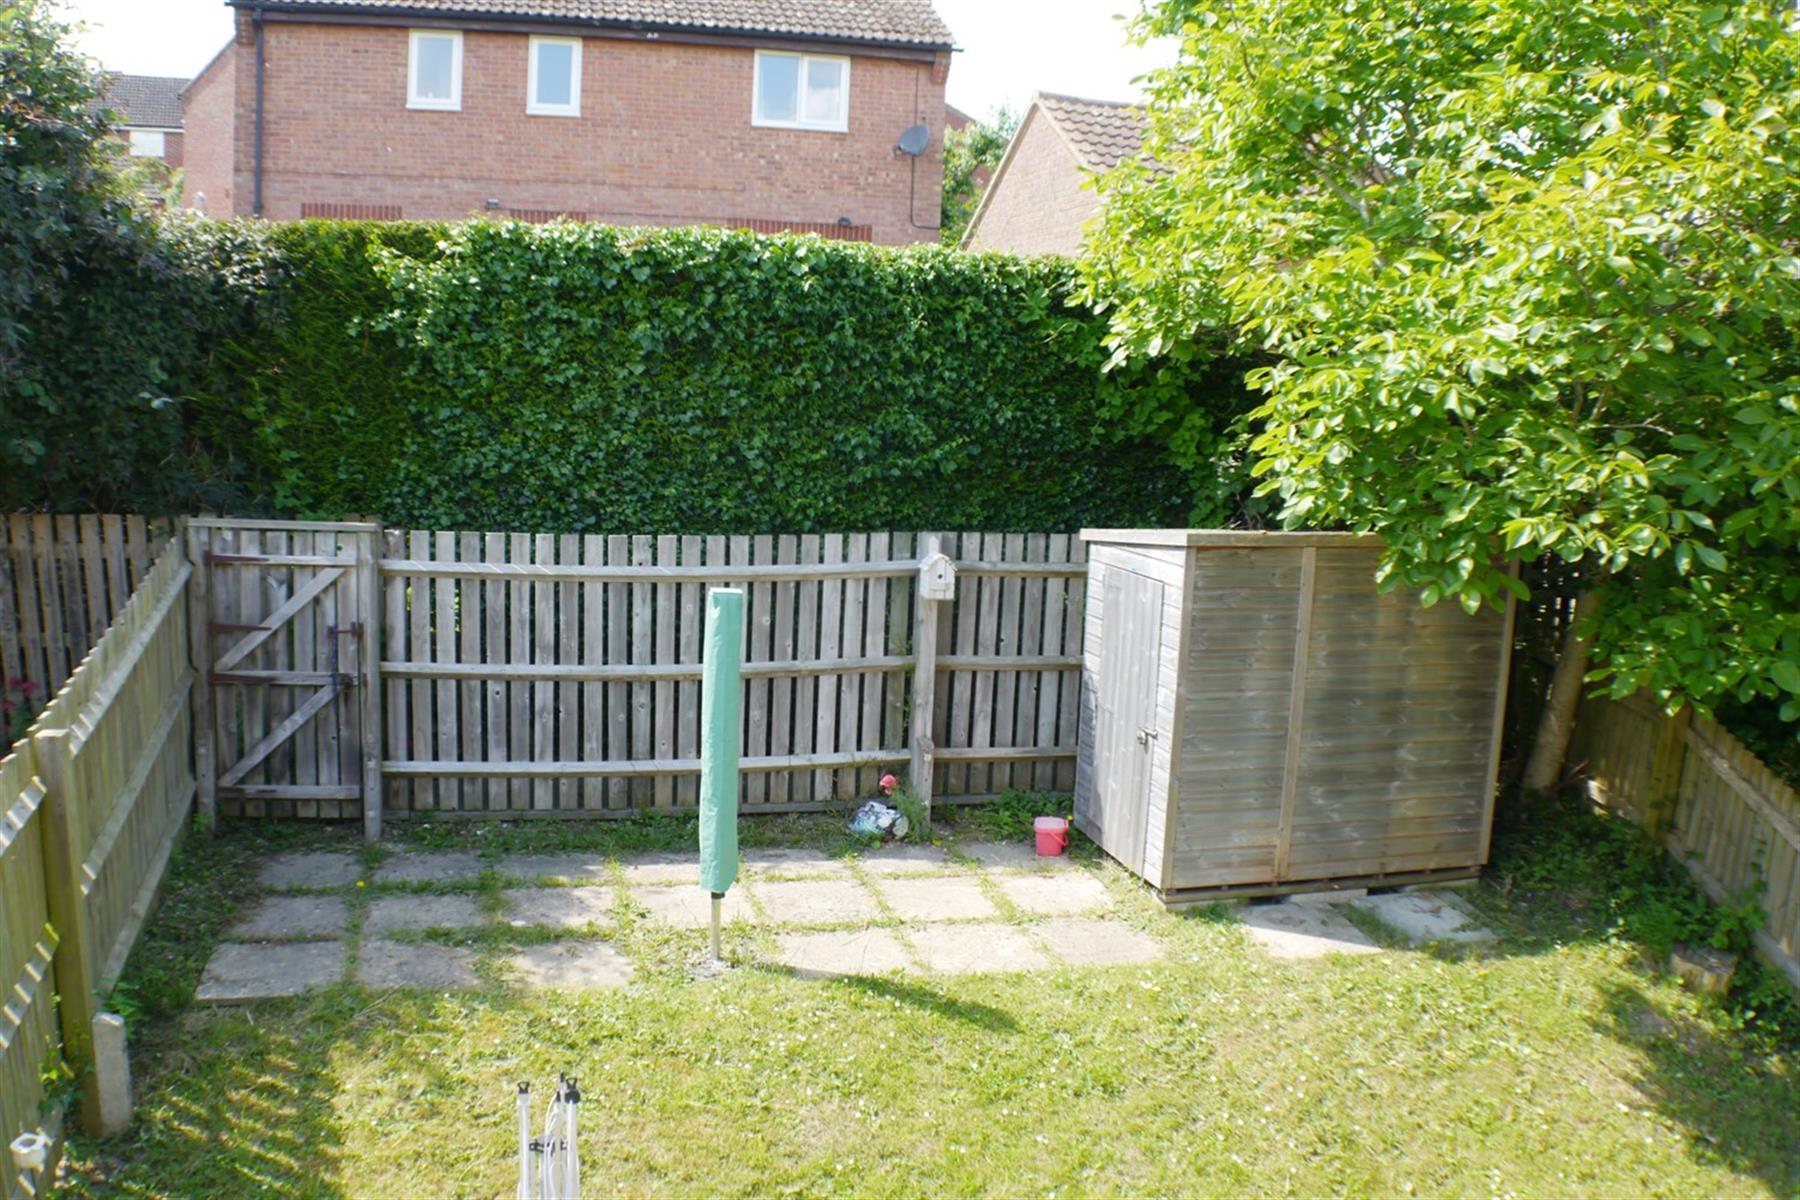 Rear Garden Area with Shed